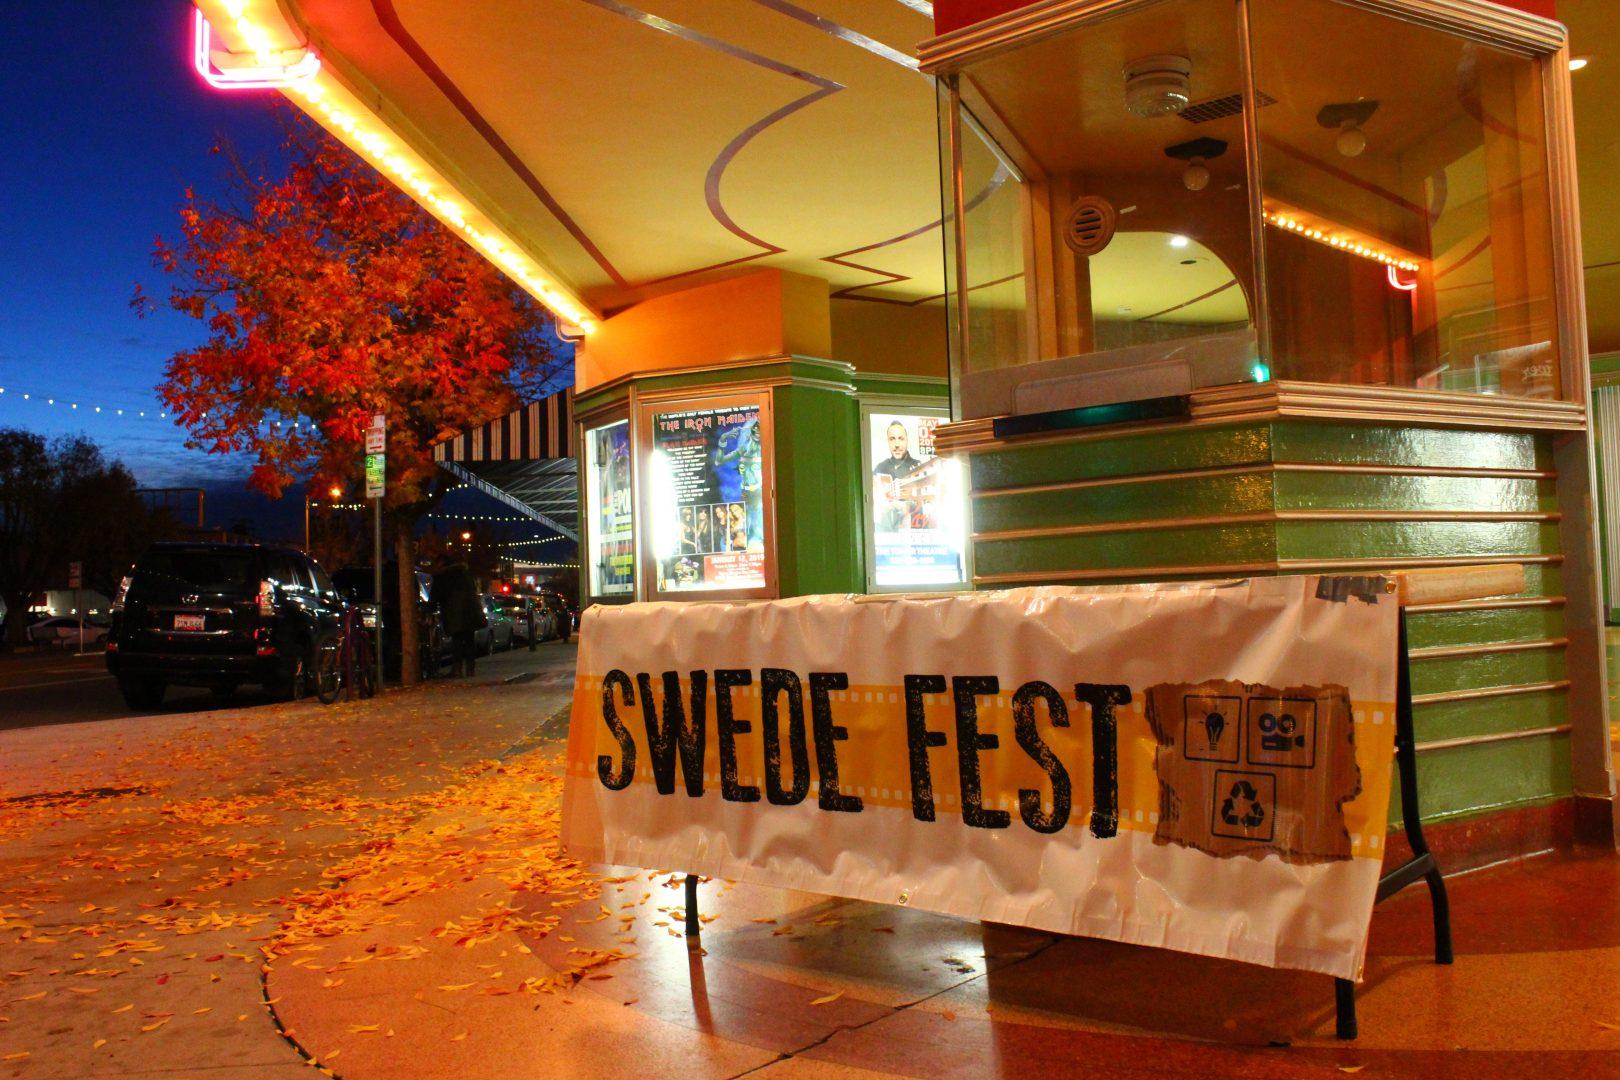 Swede Fest is a film festival that featured 28 films this year. (Paige Gibbs/The Collegian)